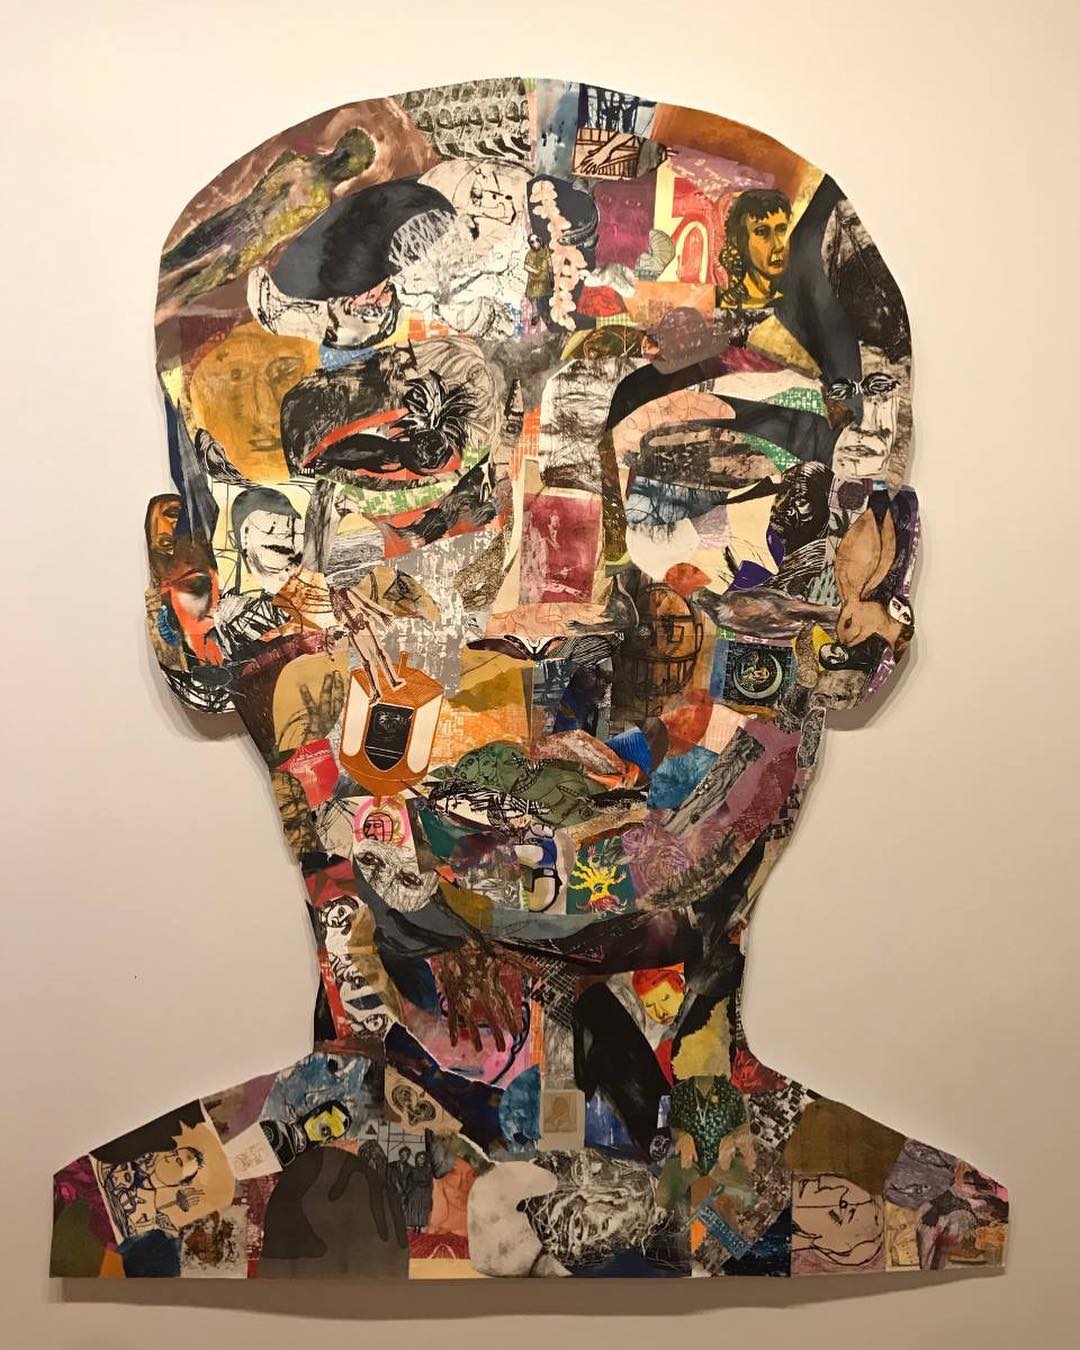 A collaborative project, Colossal Head features "collaging prints collected from the work of its members." Photo by Instagram user @molaa.art.